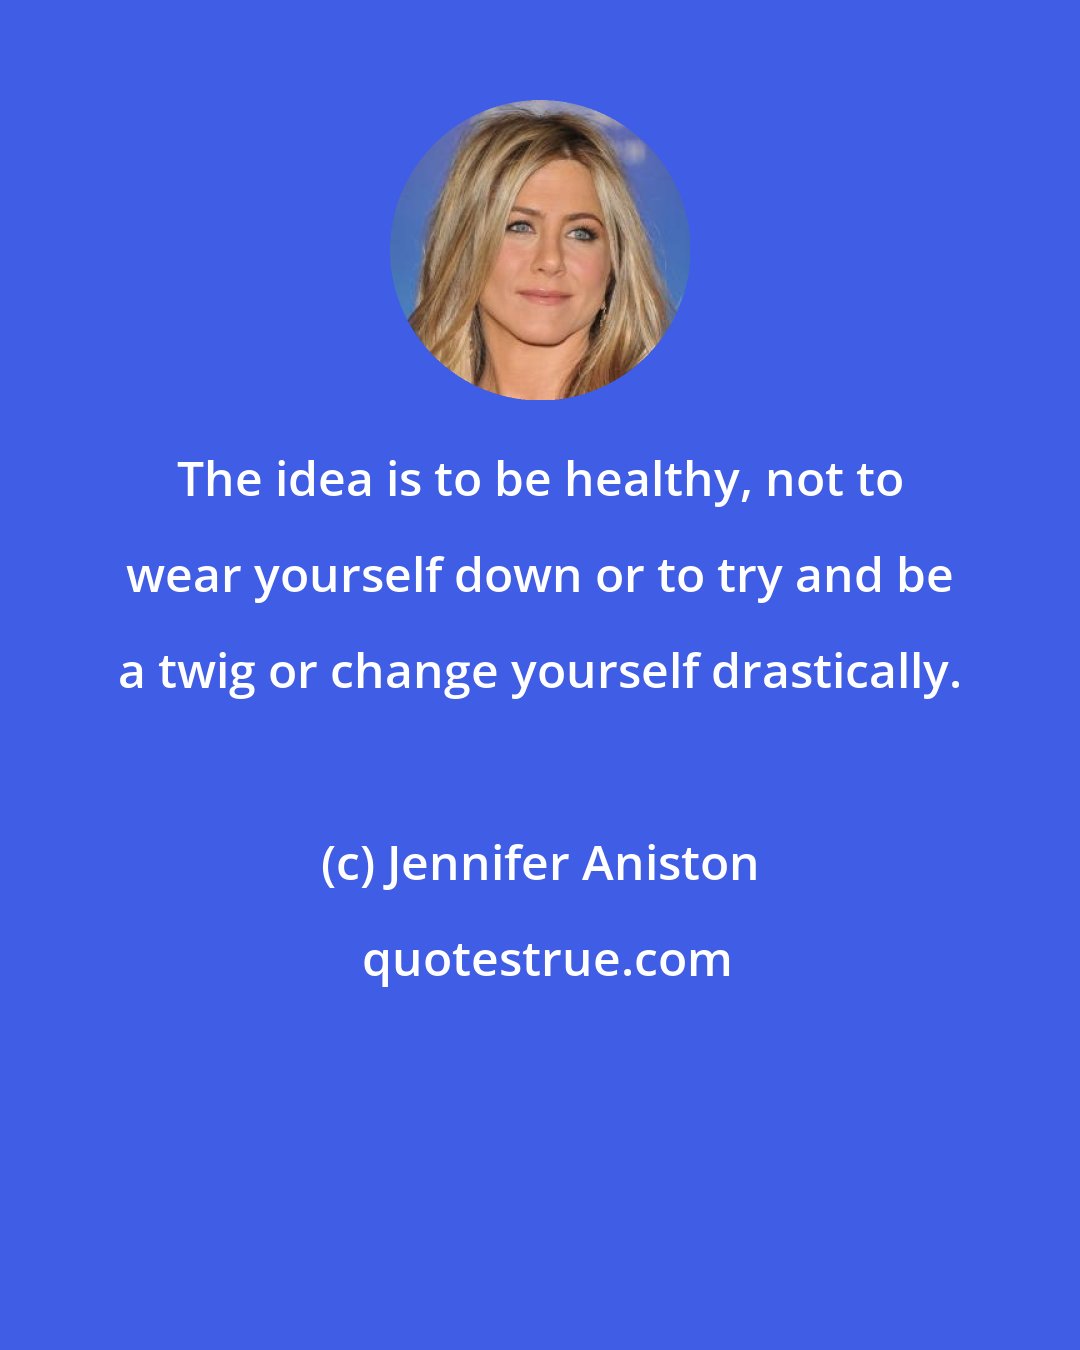 Jennifer Aniston: The idea is to be healthy, not to wear yourself down or to try and be a twig or change yourself drastically.